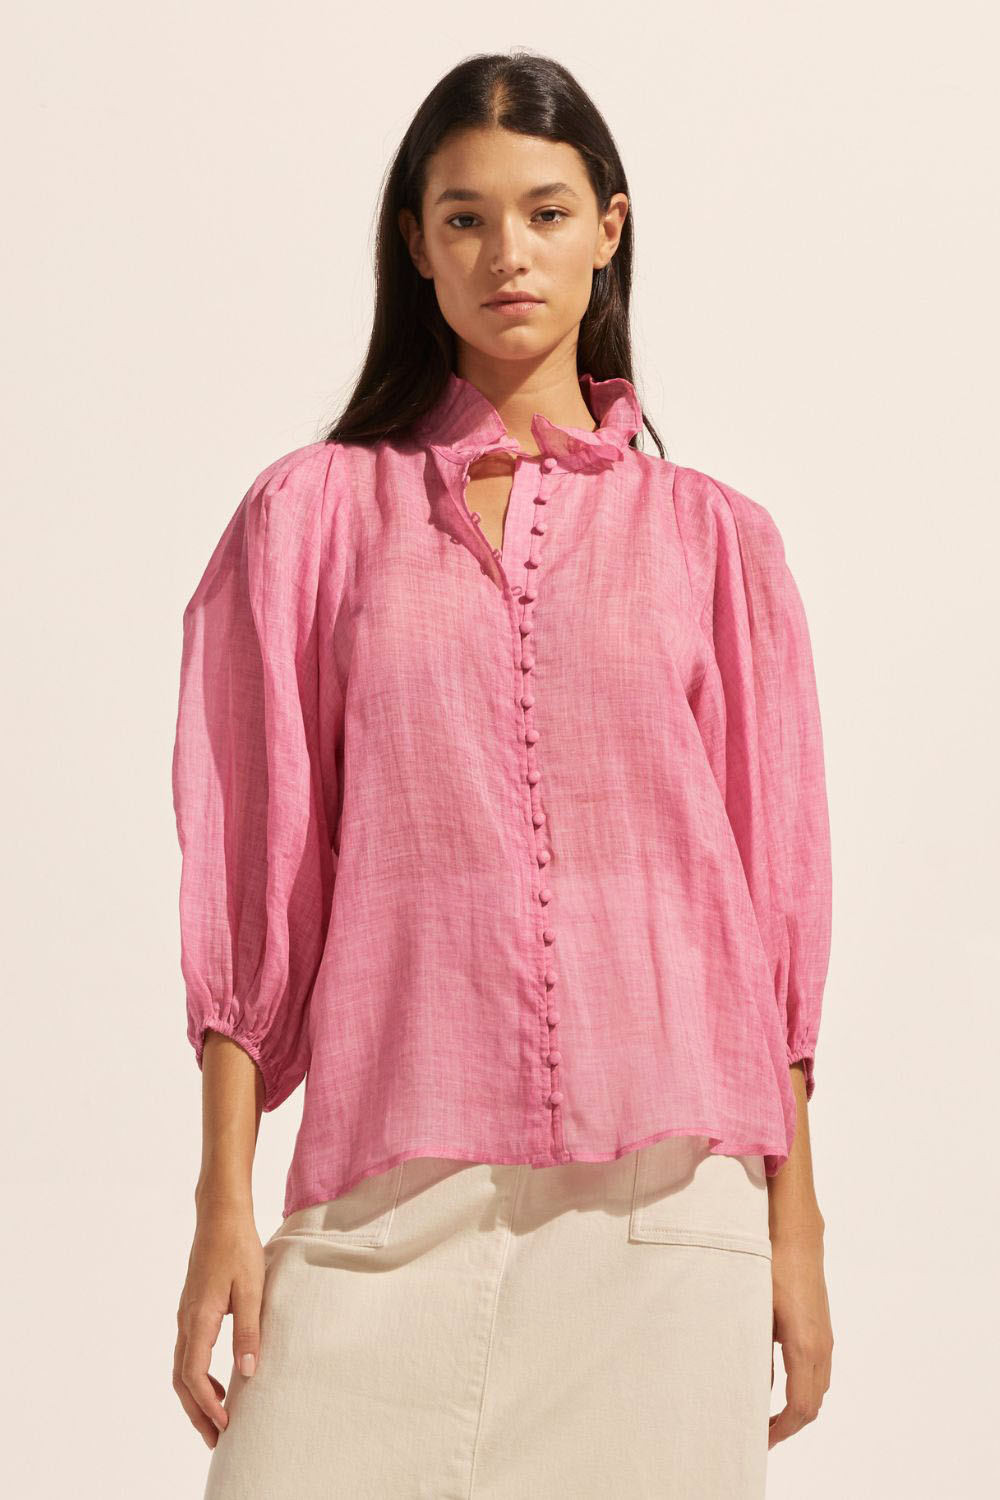 pink, covered buttons, voluminous sleeve, high neck, ruffle collar, mid length sleeve, elasticated cuff, top, front image